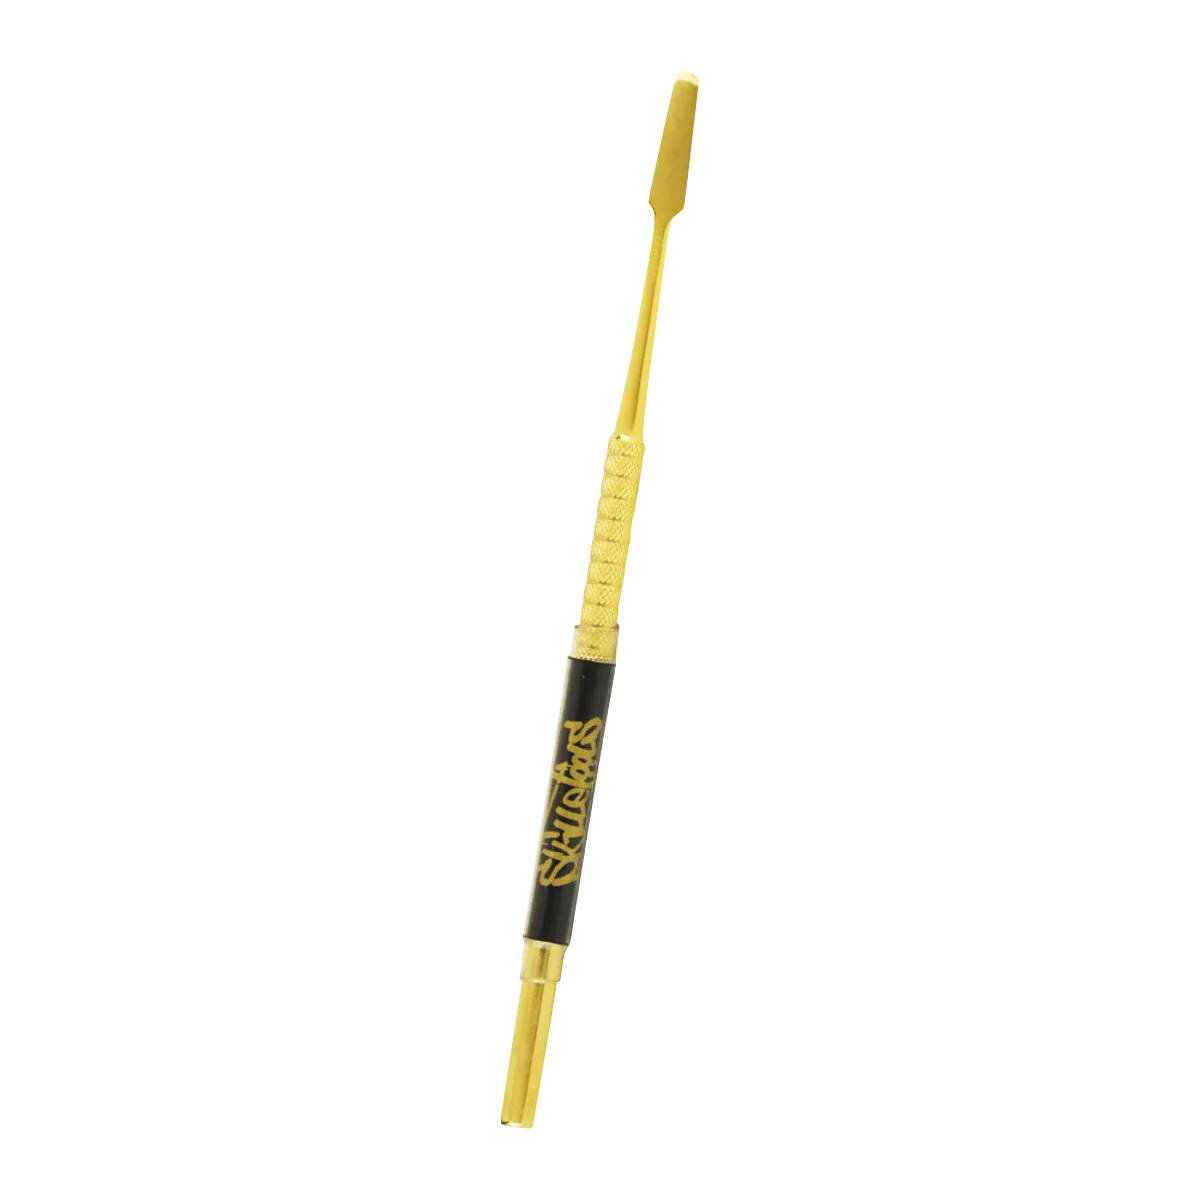 Skilletools Gold Series 6" Metal Dab Tool for Concentrates - Angled Side View